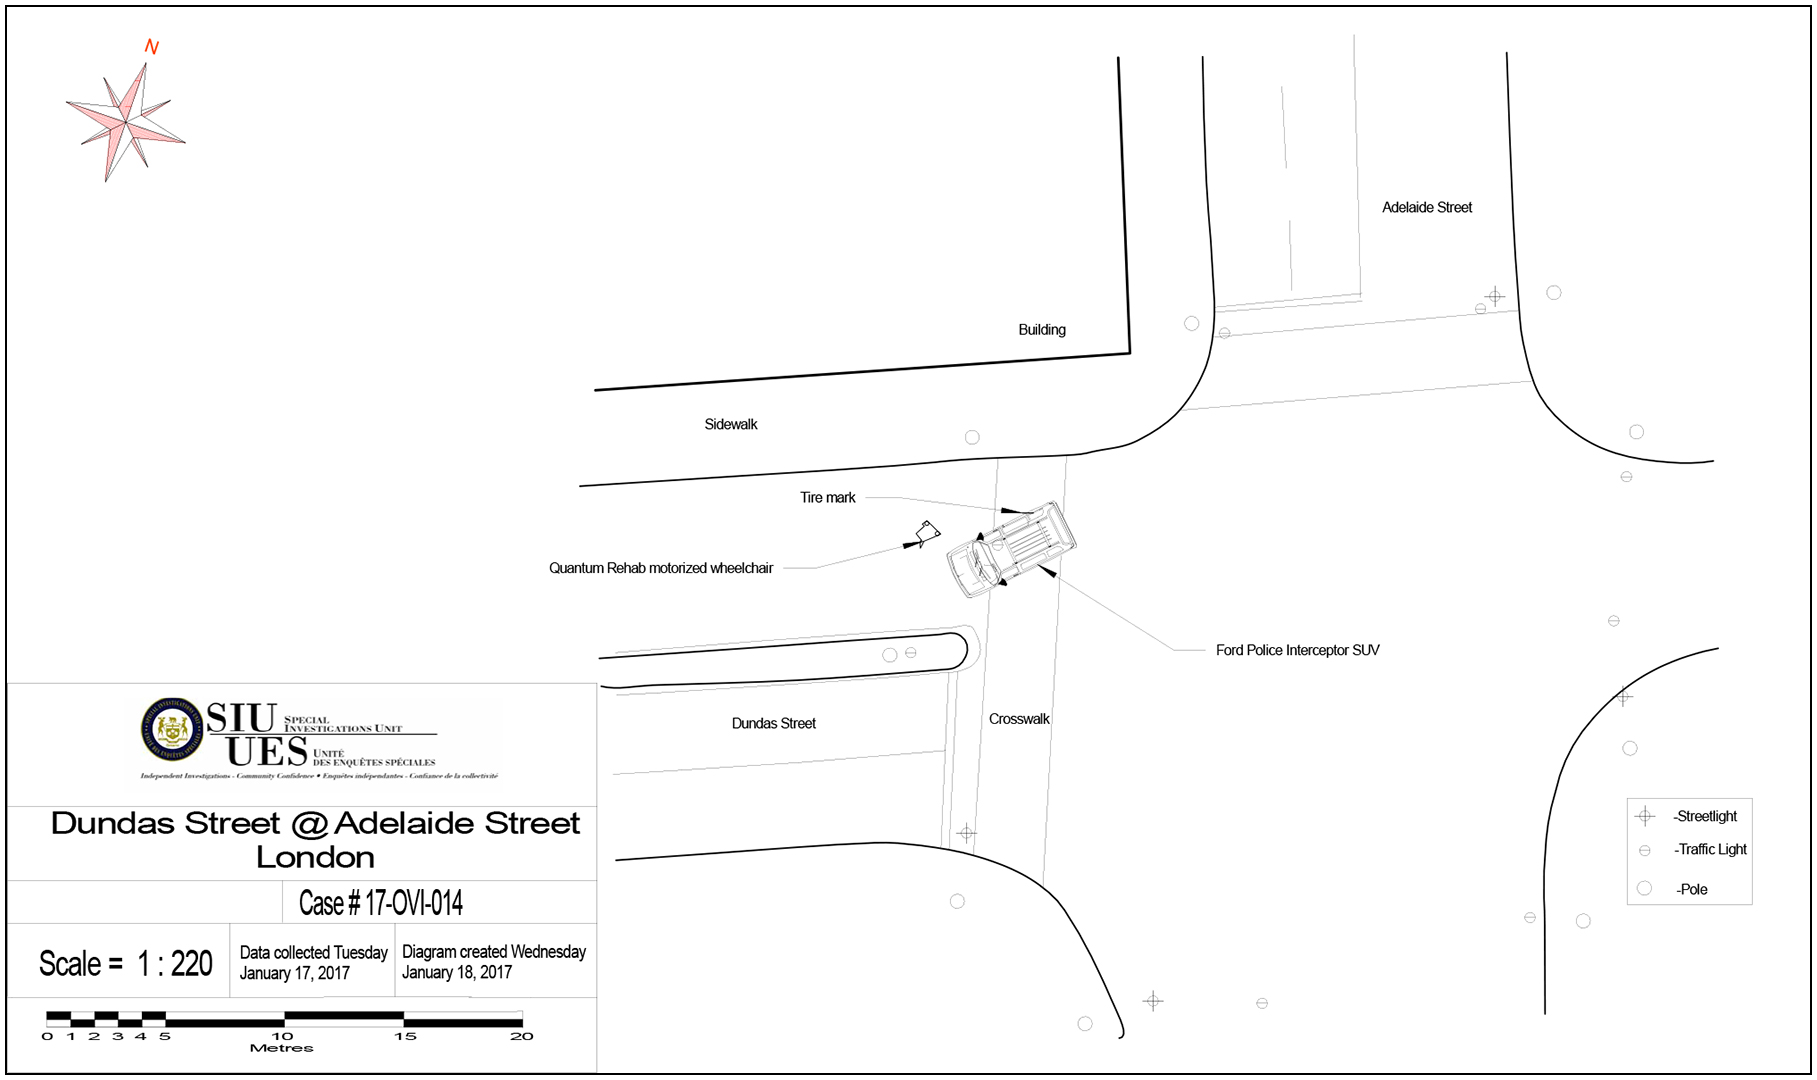 Diagram of the intersection of Dundas Street and Adelaide Street, showing the location of the police vehicle and wheelchair